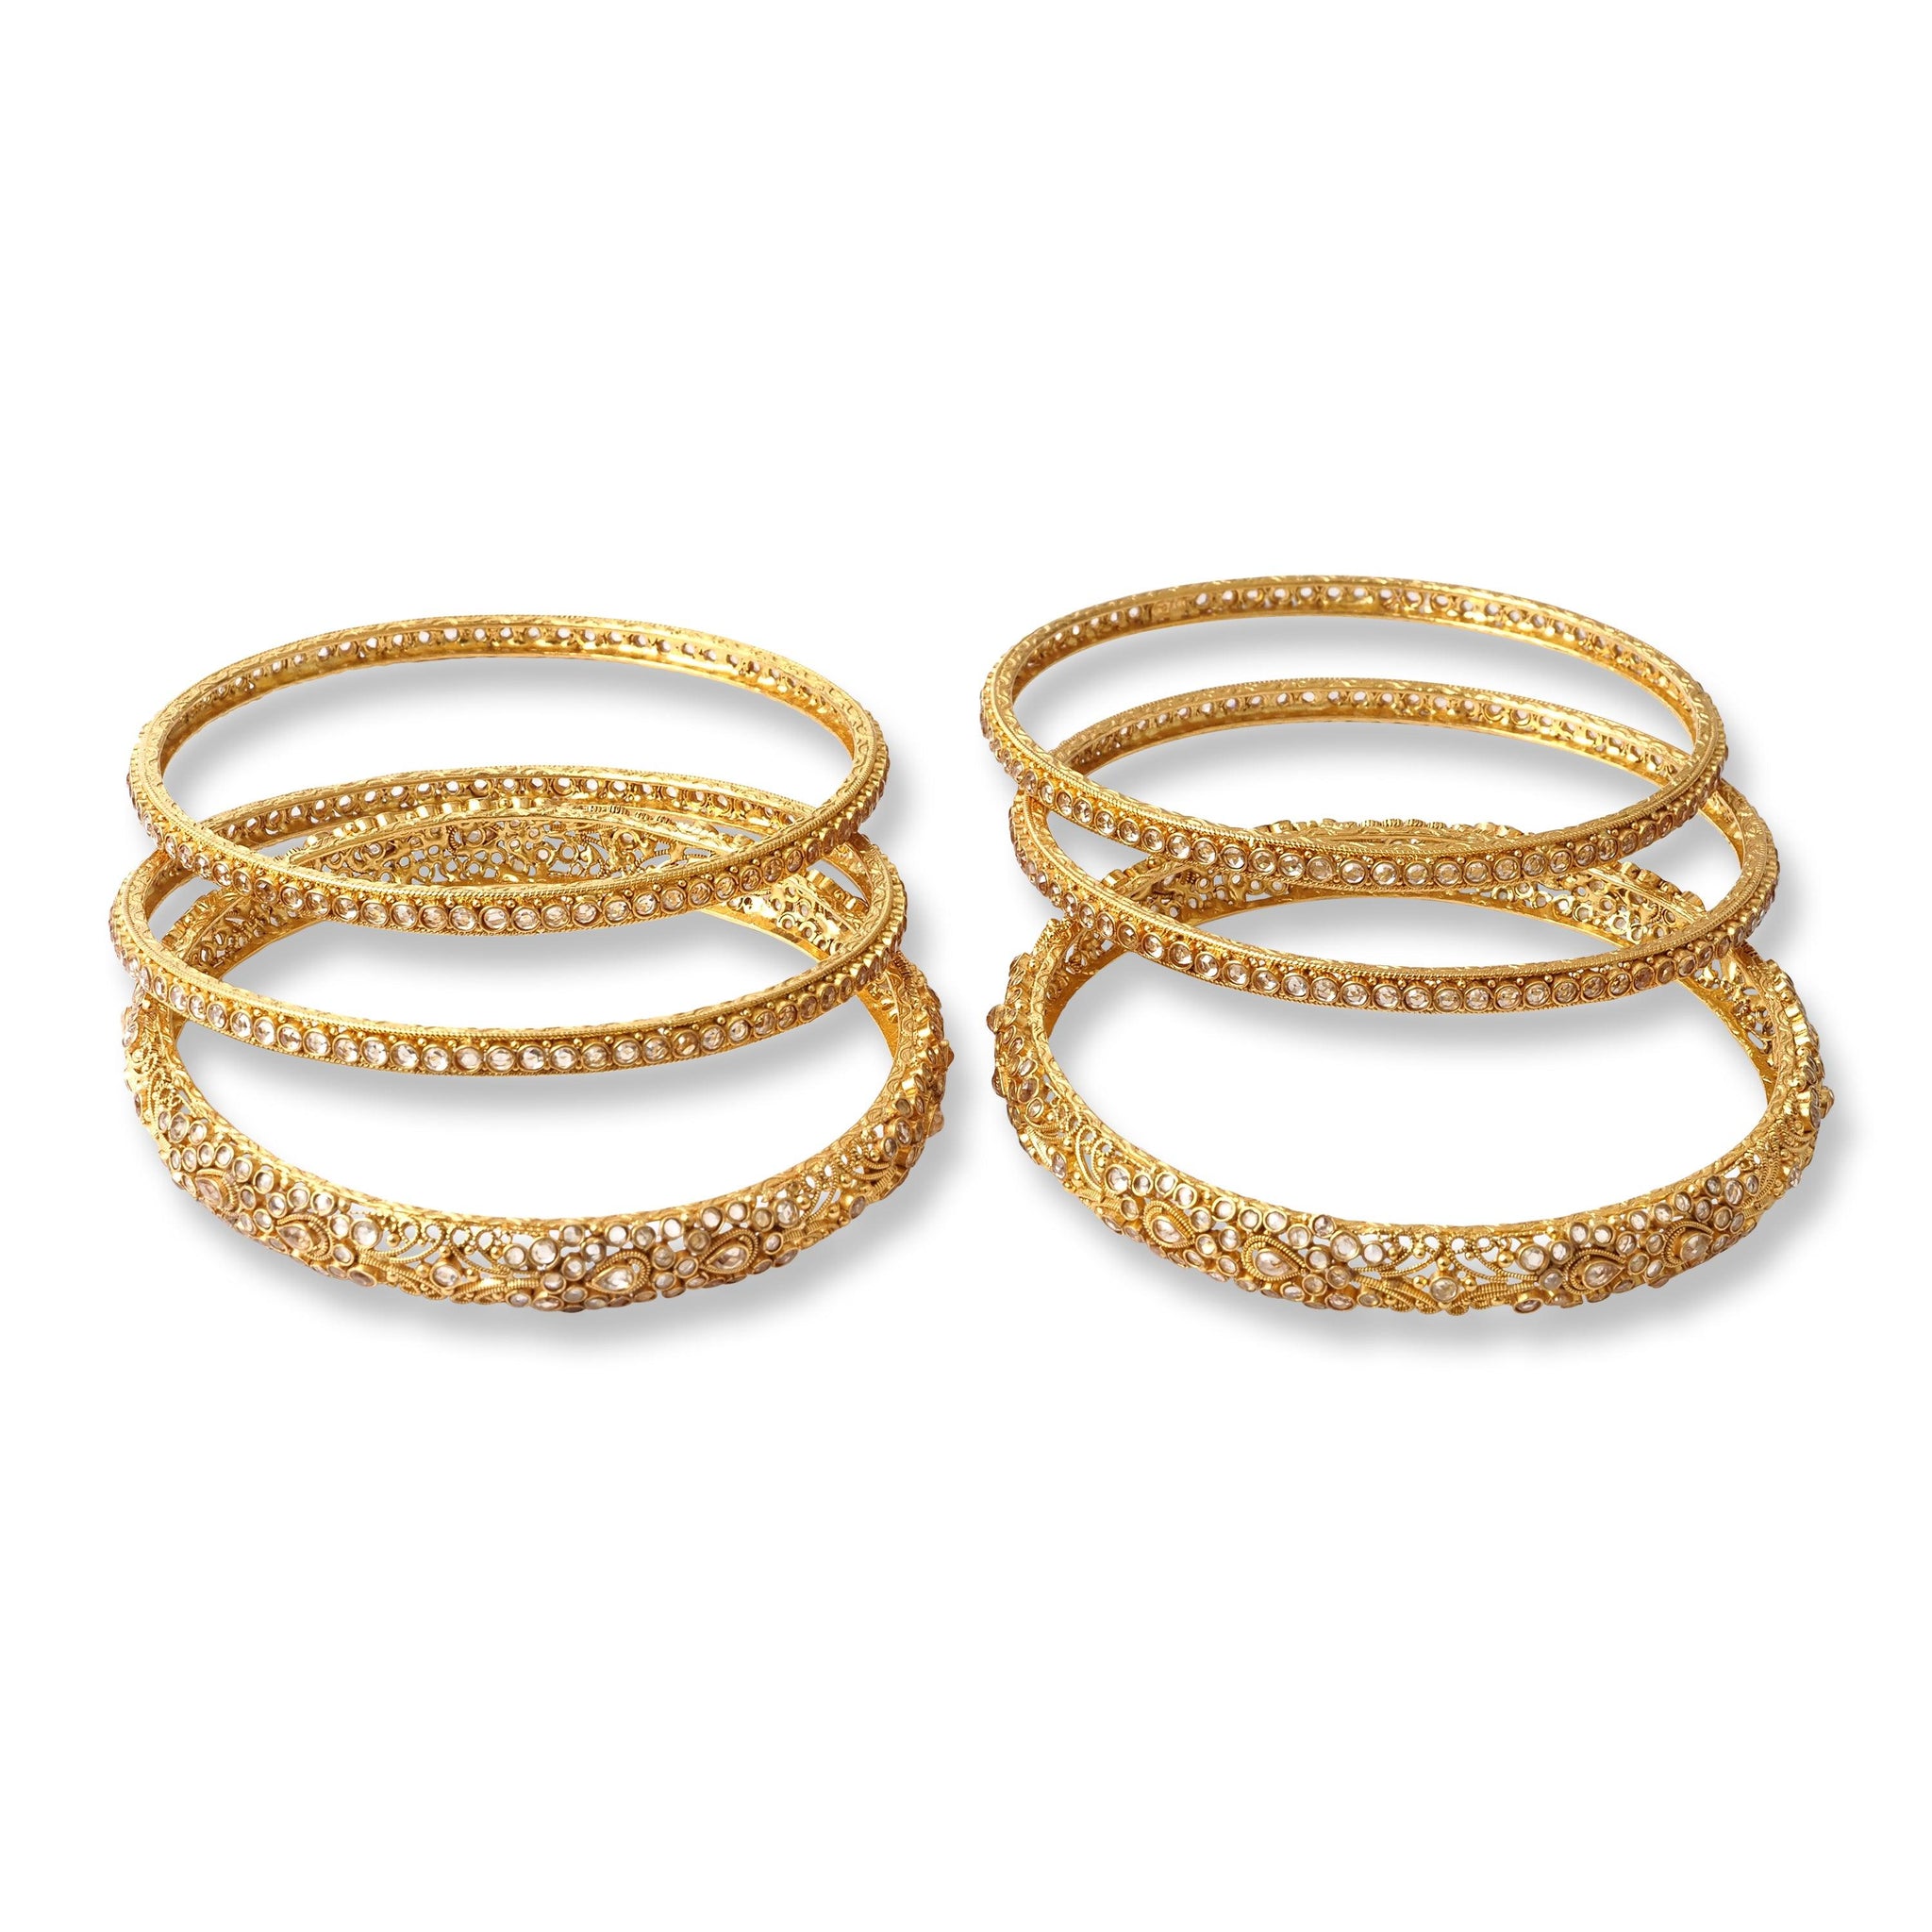 22ct Gold Antiquated Look Bangles with Comfort Fit (111.6g) B-8280